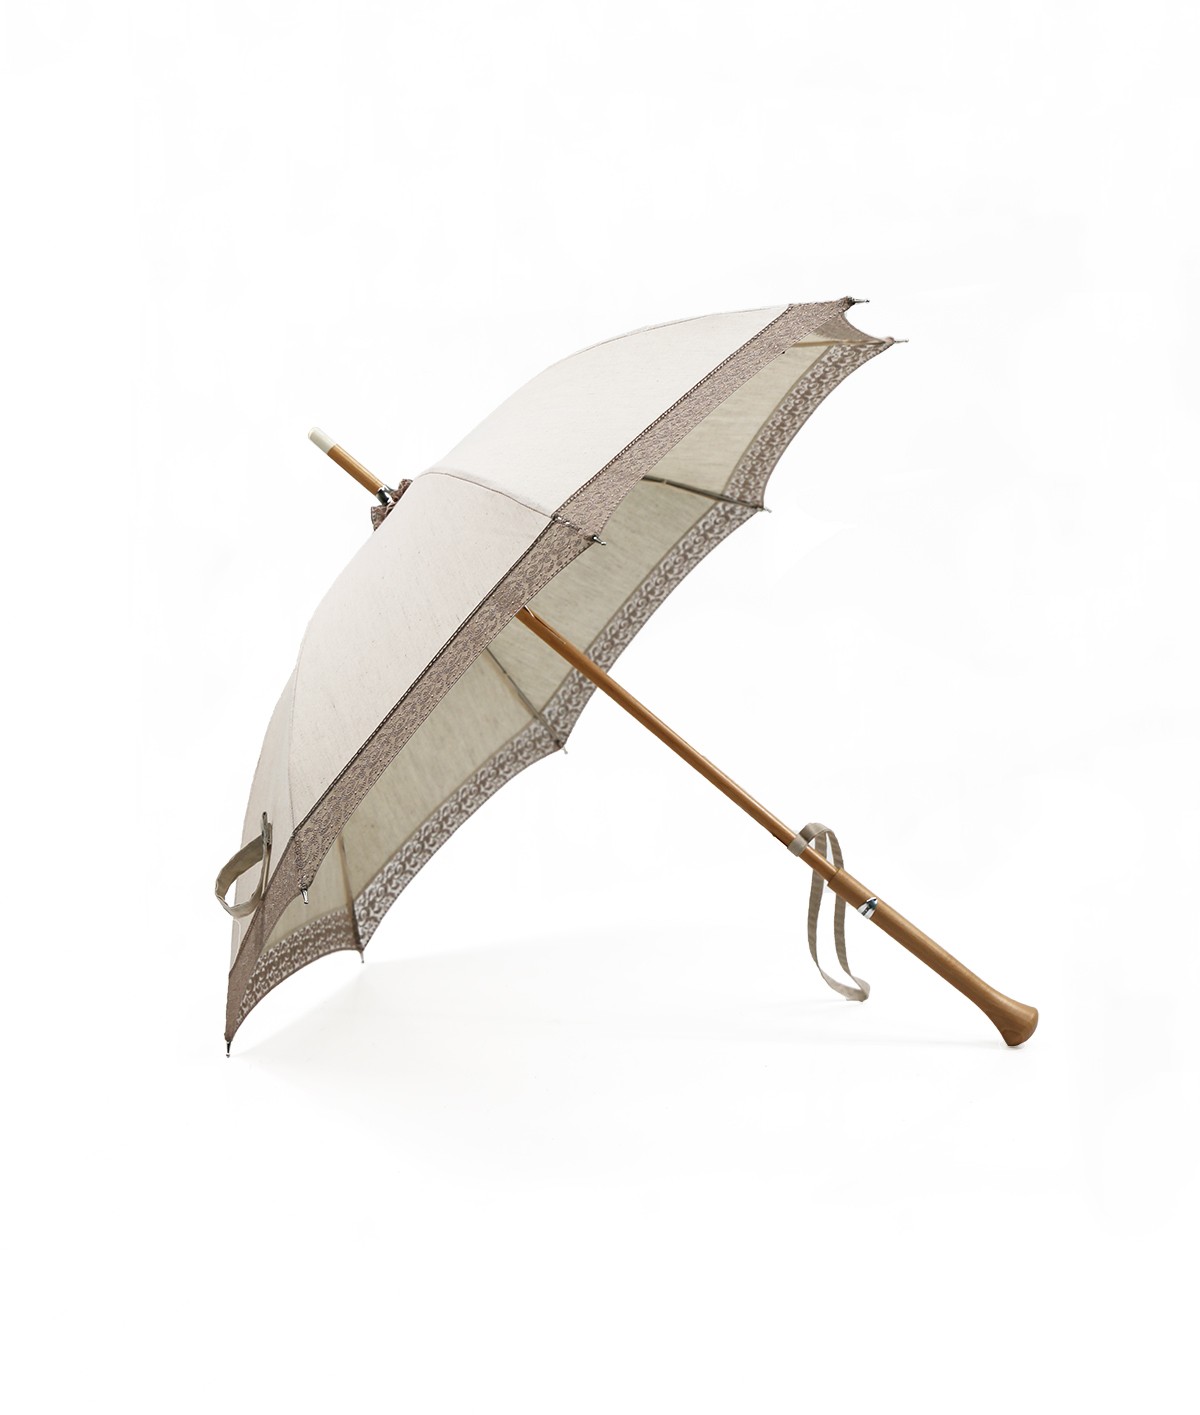 → Parasol "Linen and Lace" - Ocher - Sun Umbrellas Handcrafted in France by the Umbrellas Manufacturer Maison Pierre Vaux